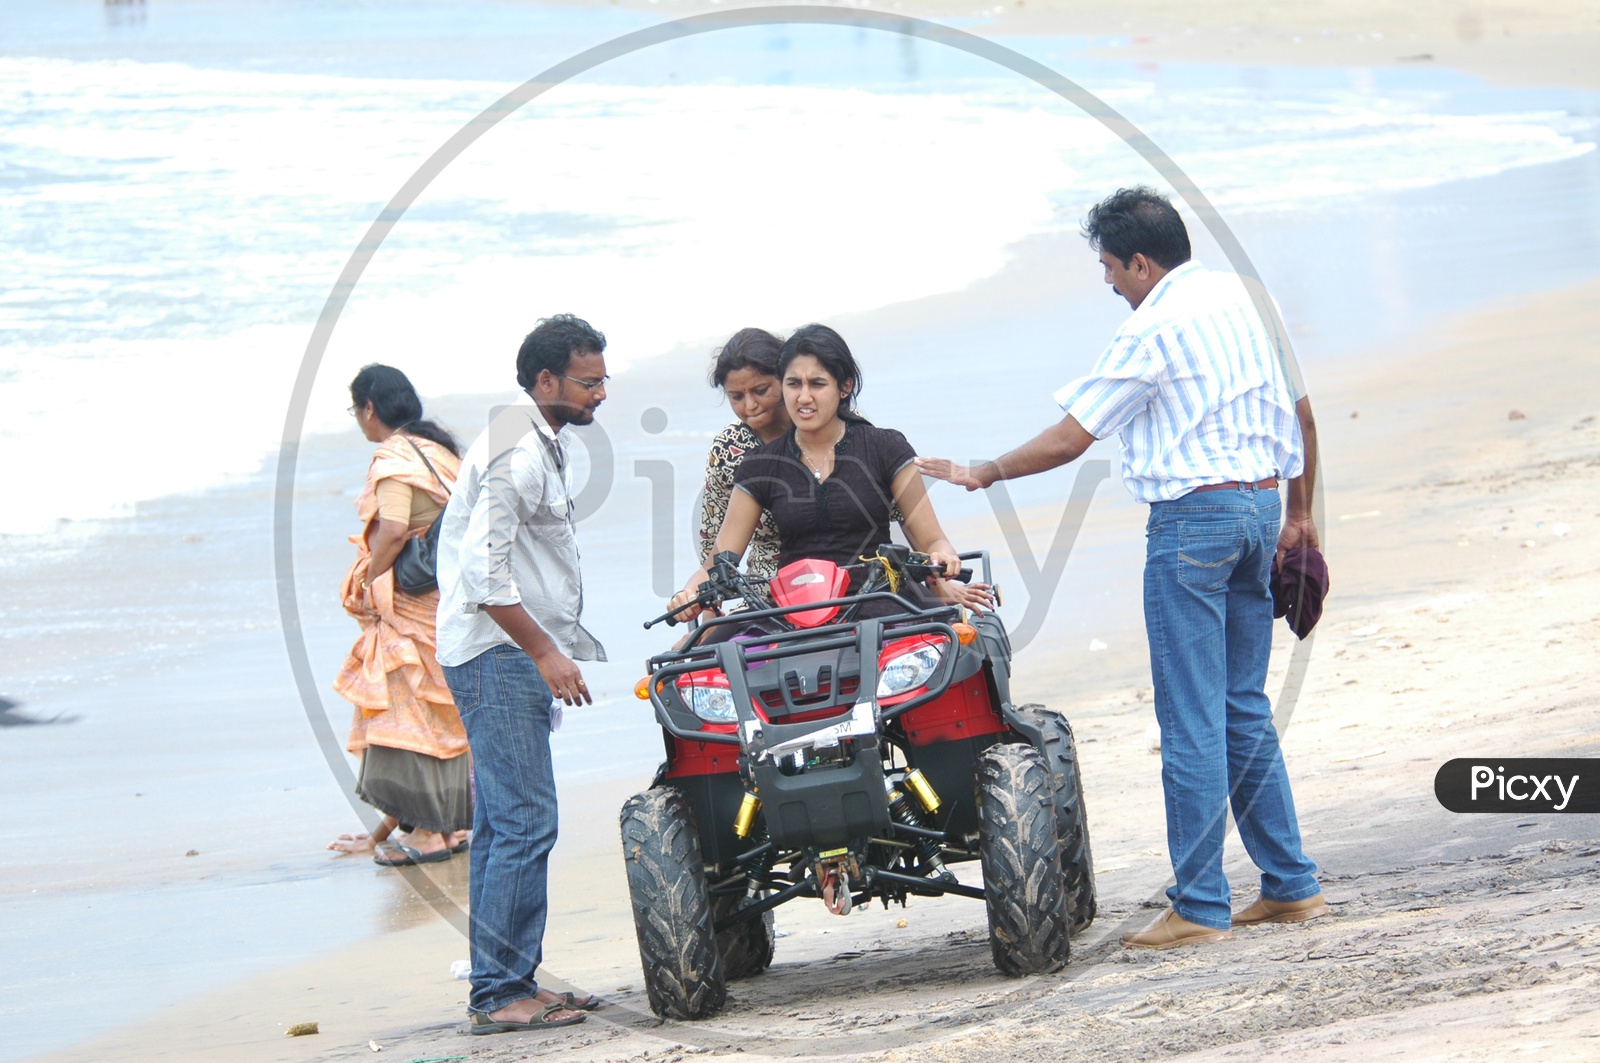 Indian Girls riding Quad Cars by the beach